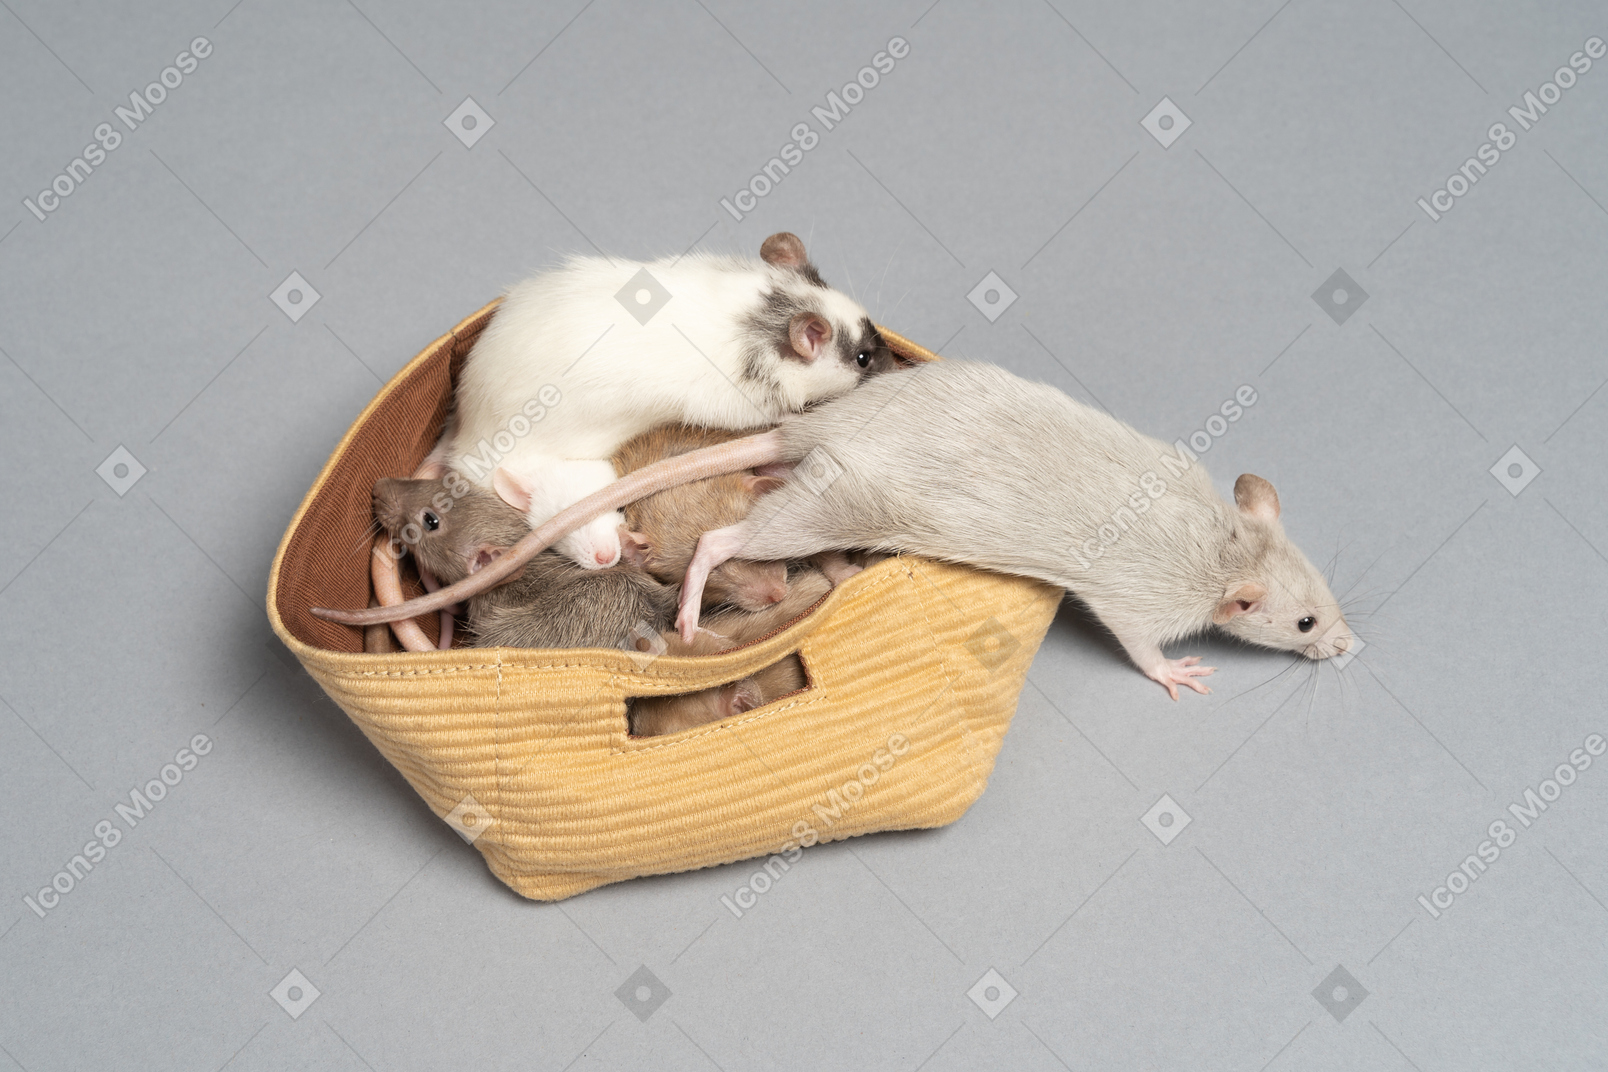 A bunch of mice escaping from a yellow bag